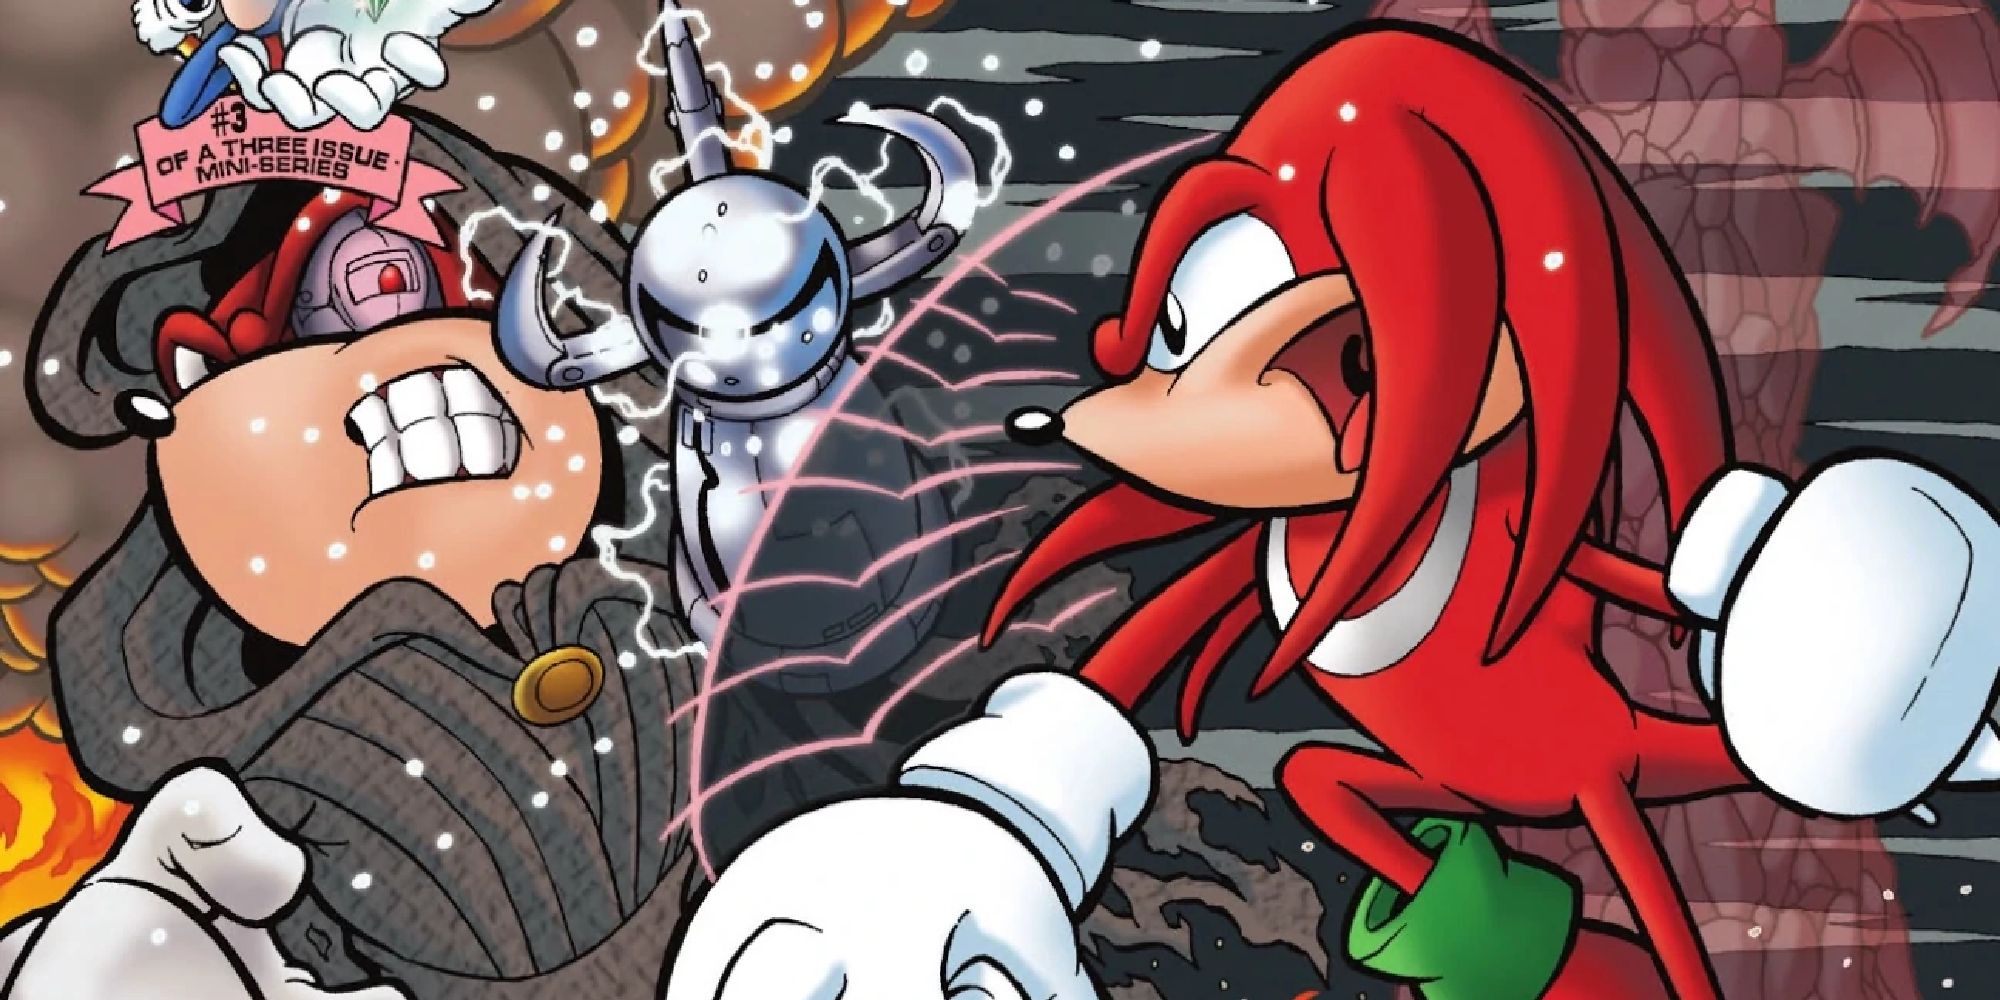 Knuckles punching a cybernetic echidna in an Archie Comics cover